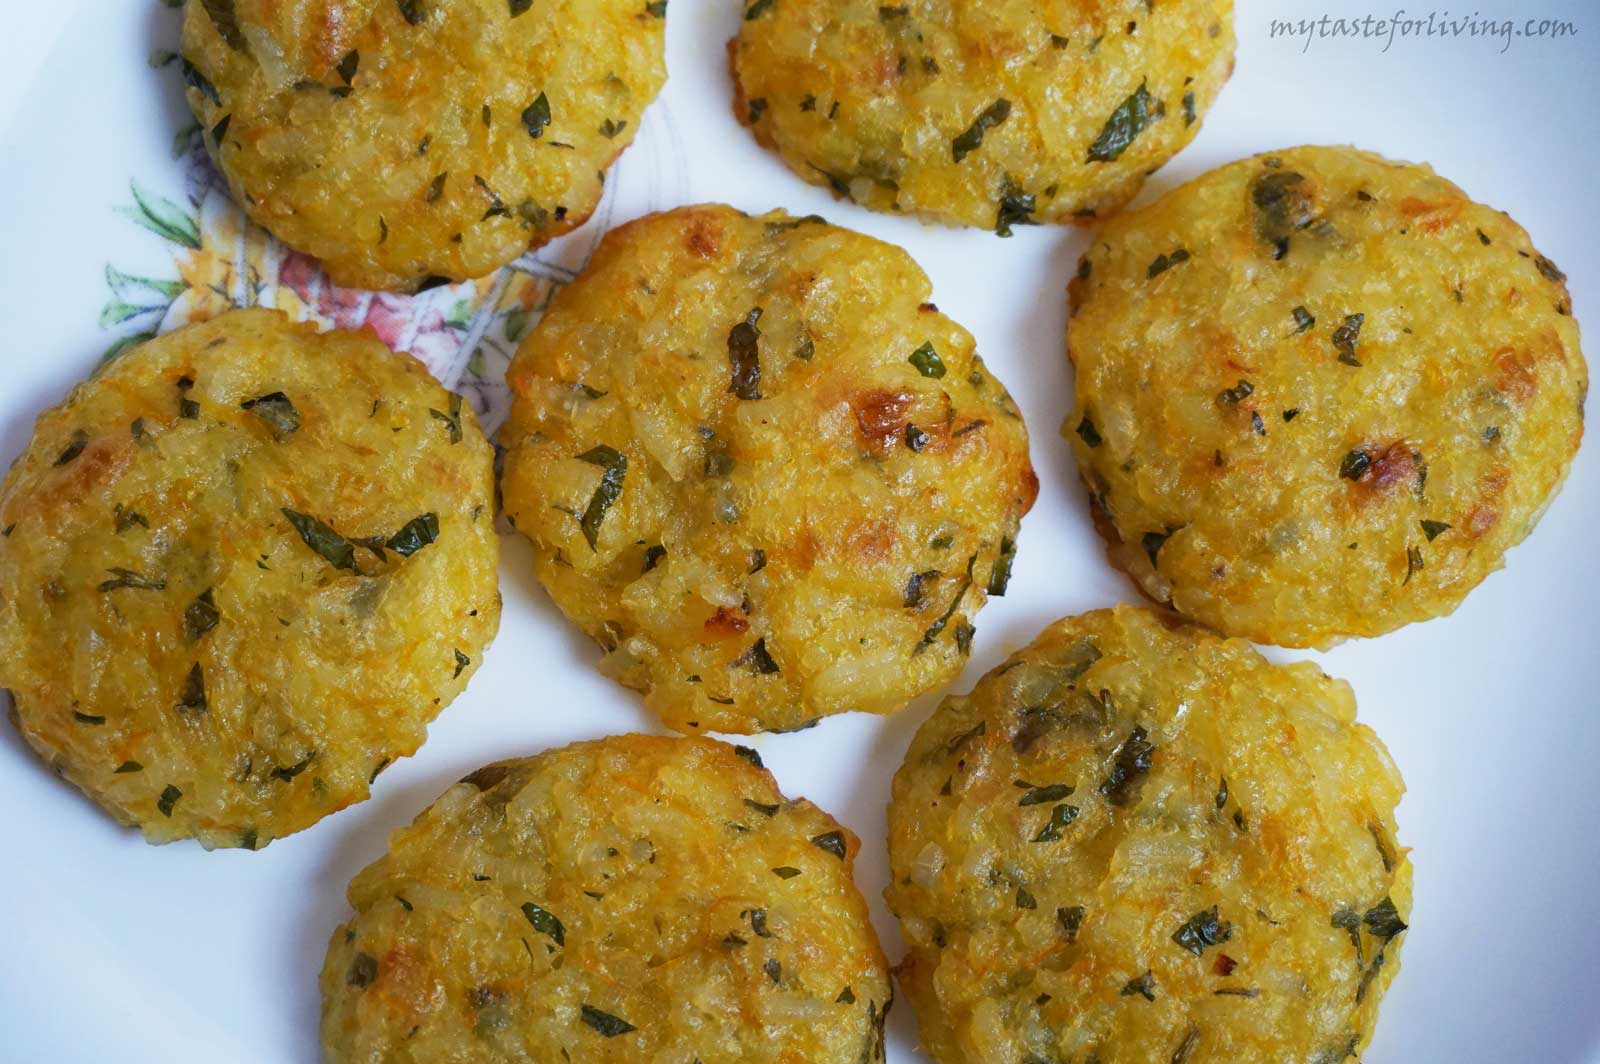 Vegan balls baked in the oven, made from potatoes, rice, carrots, onions and parsley.